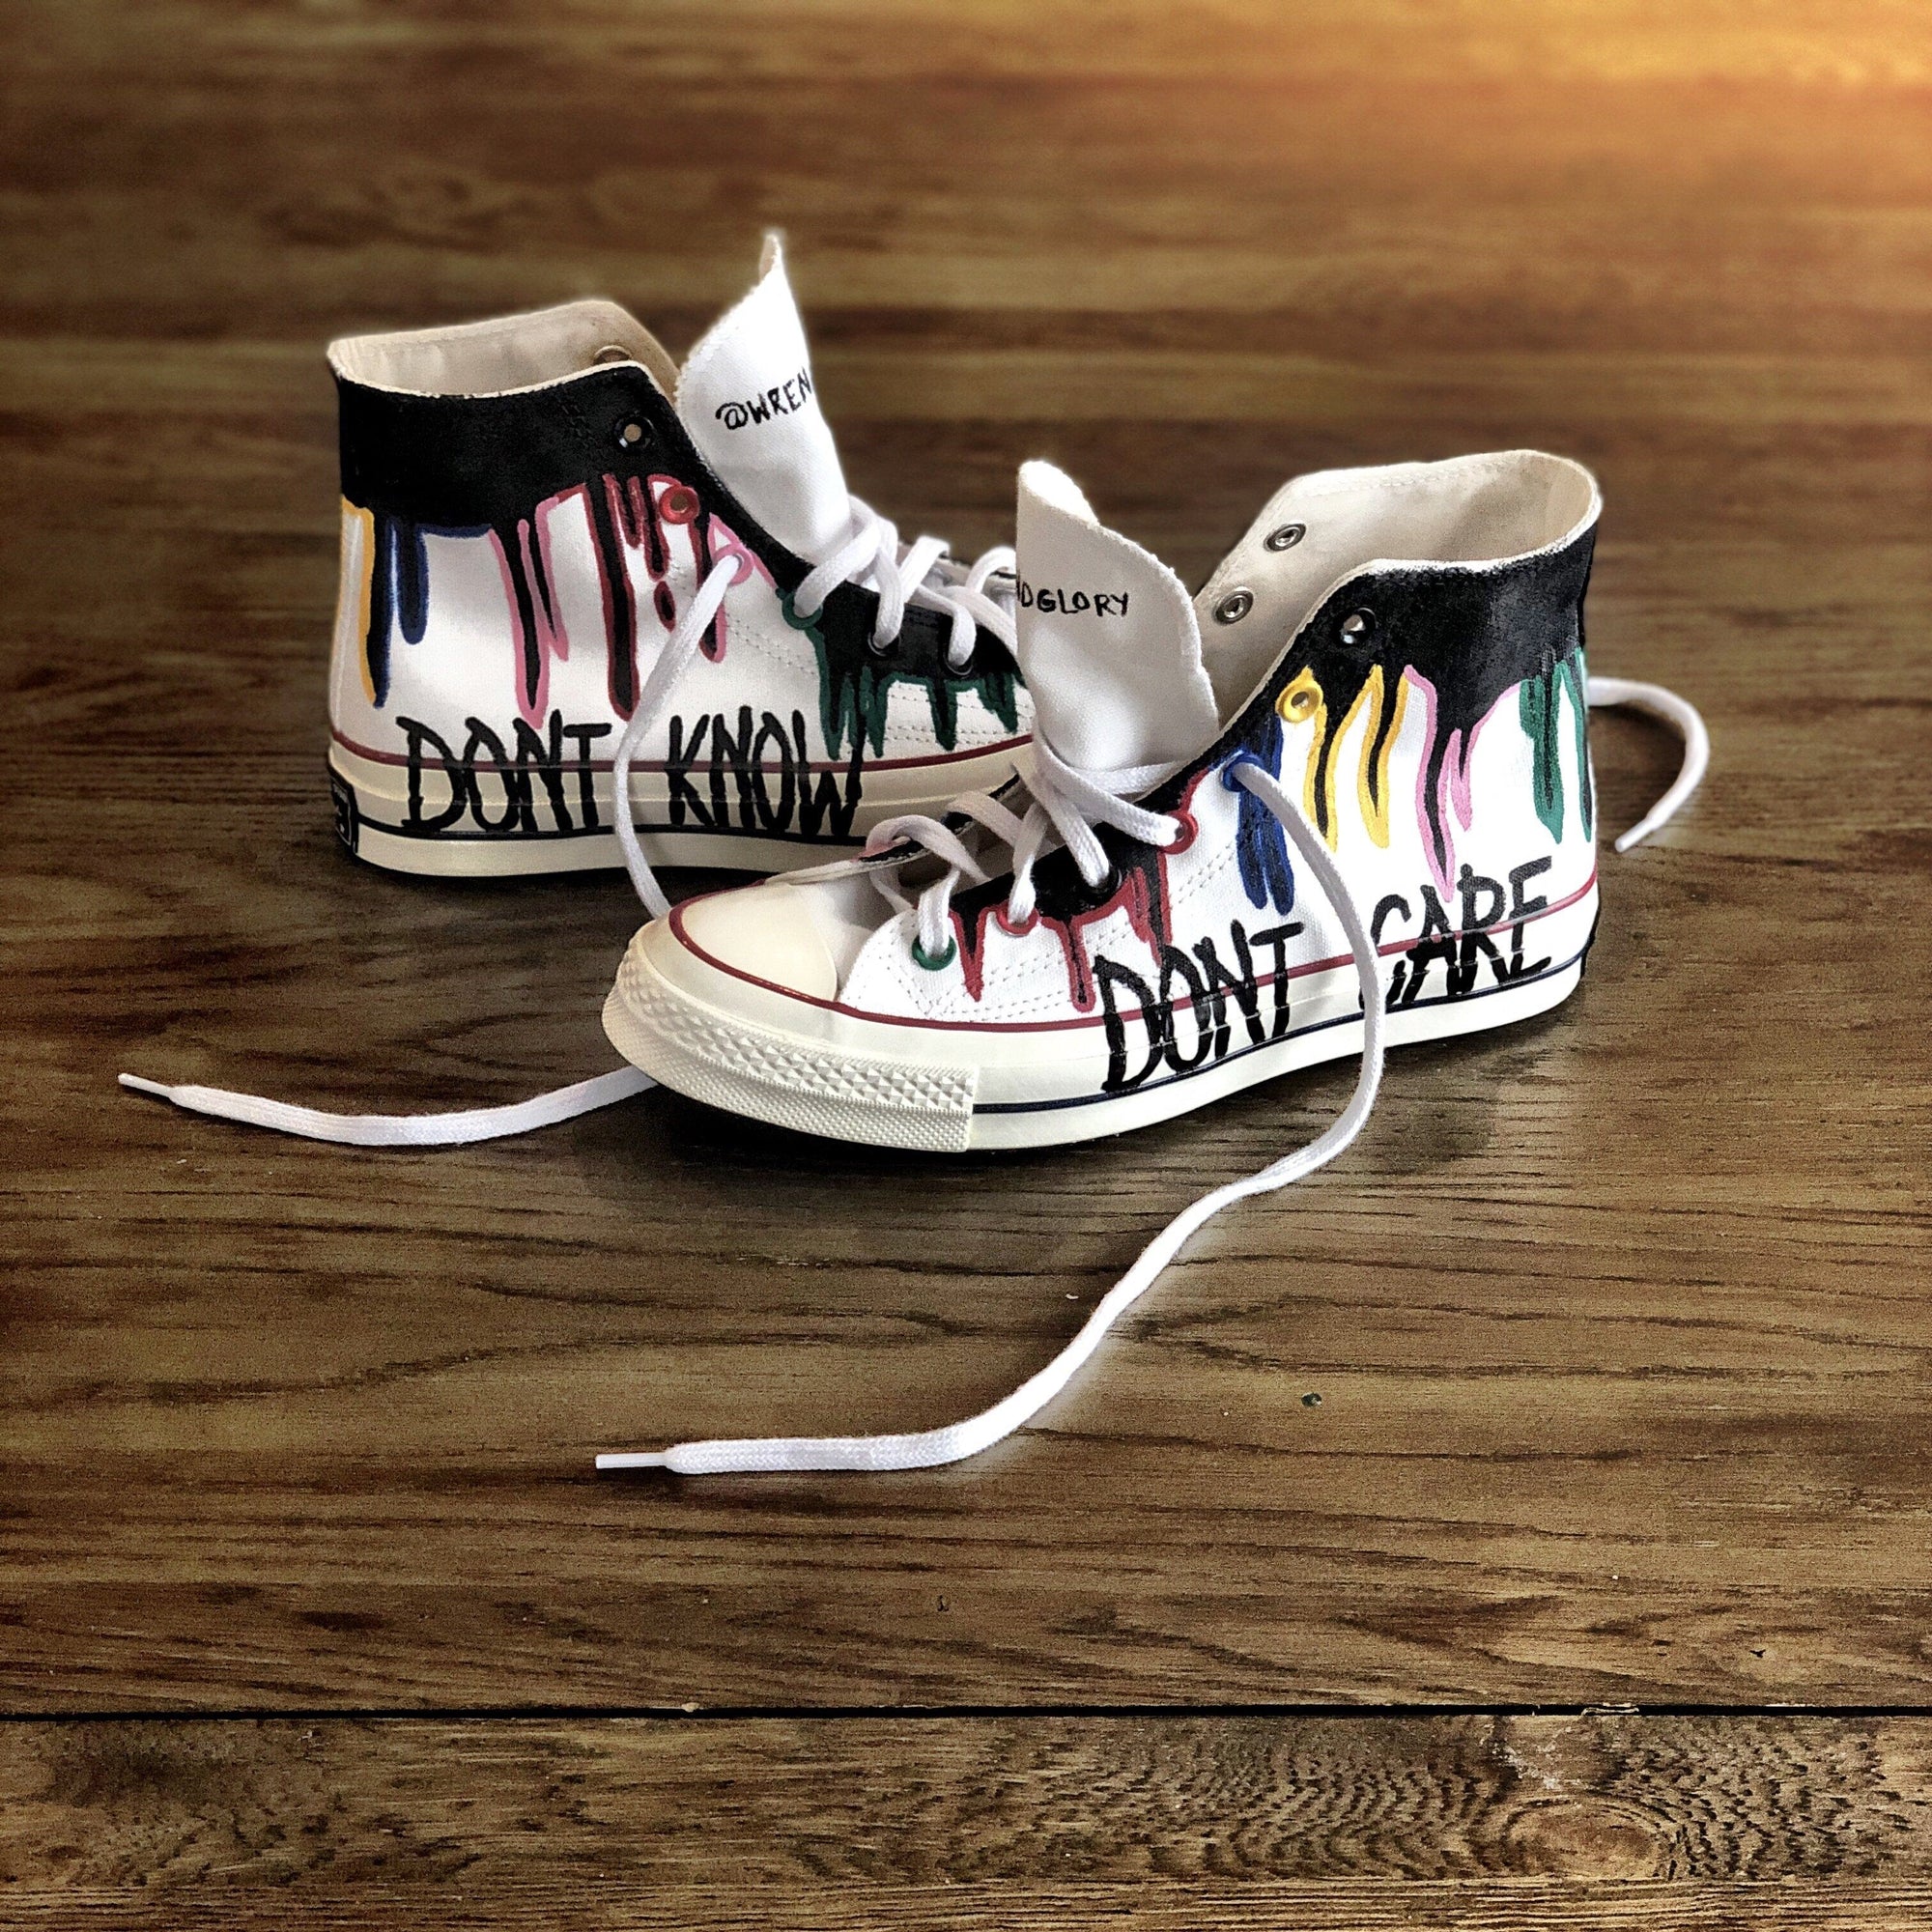 painted converse